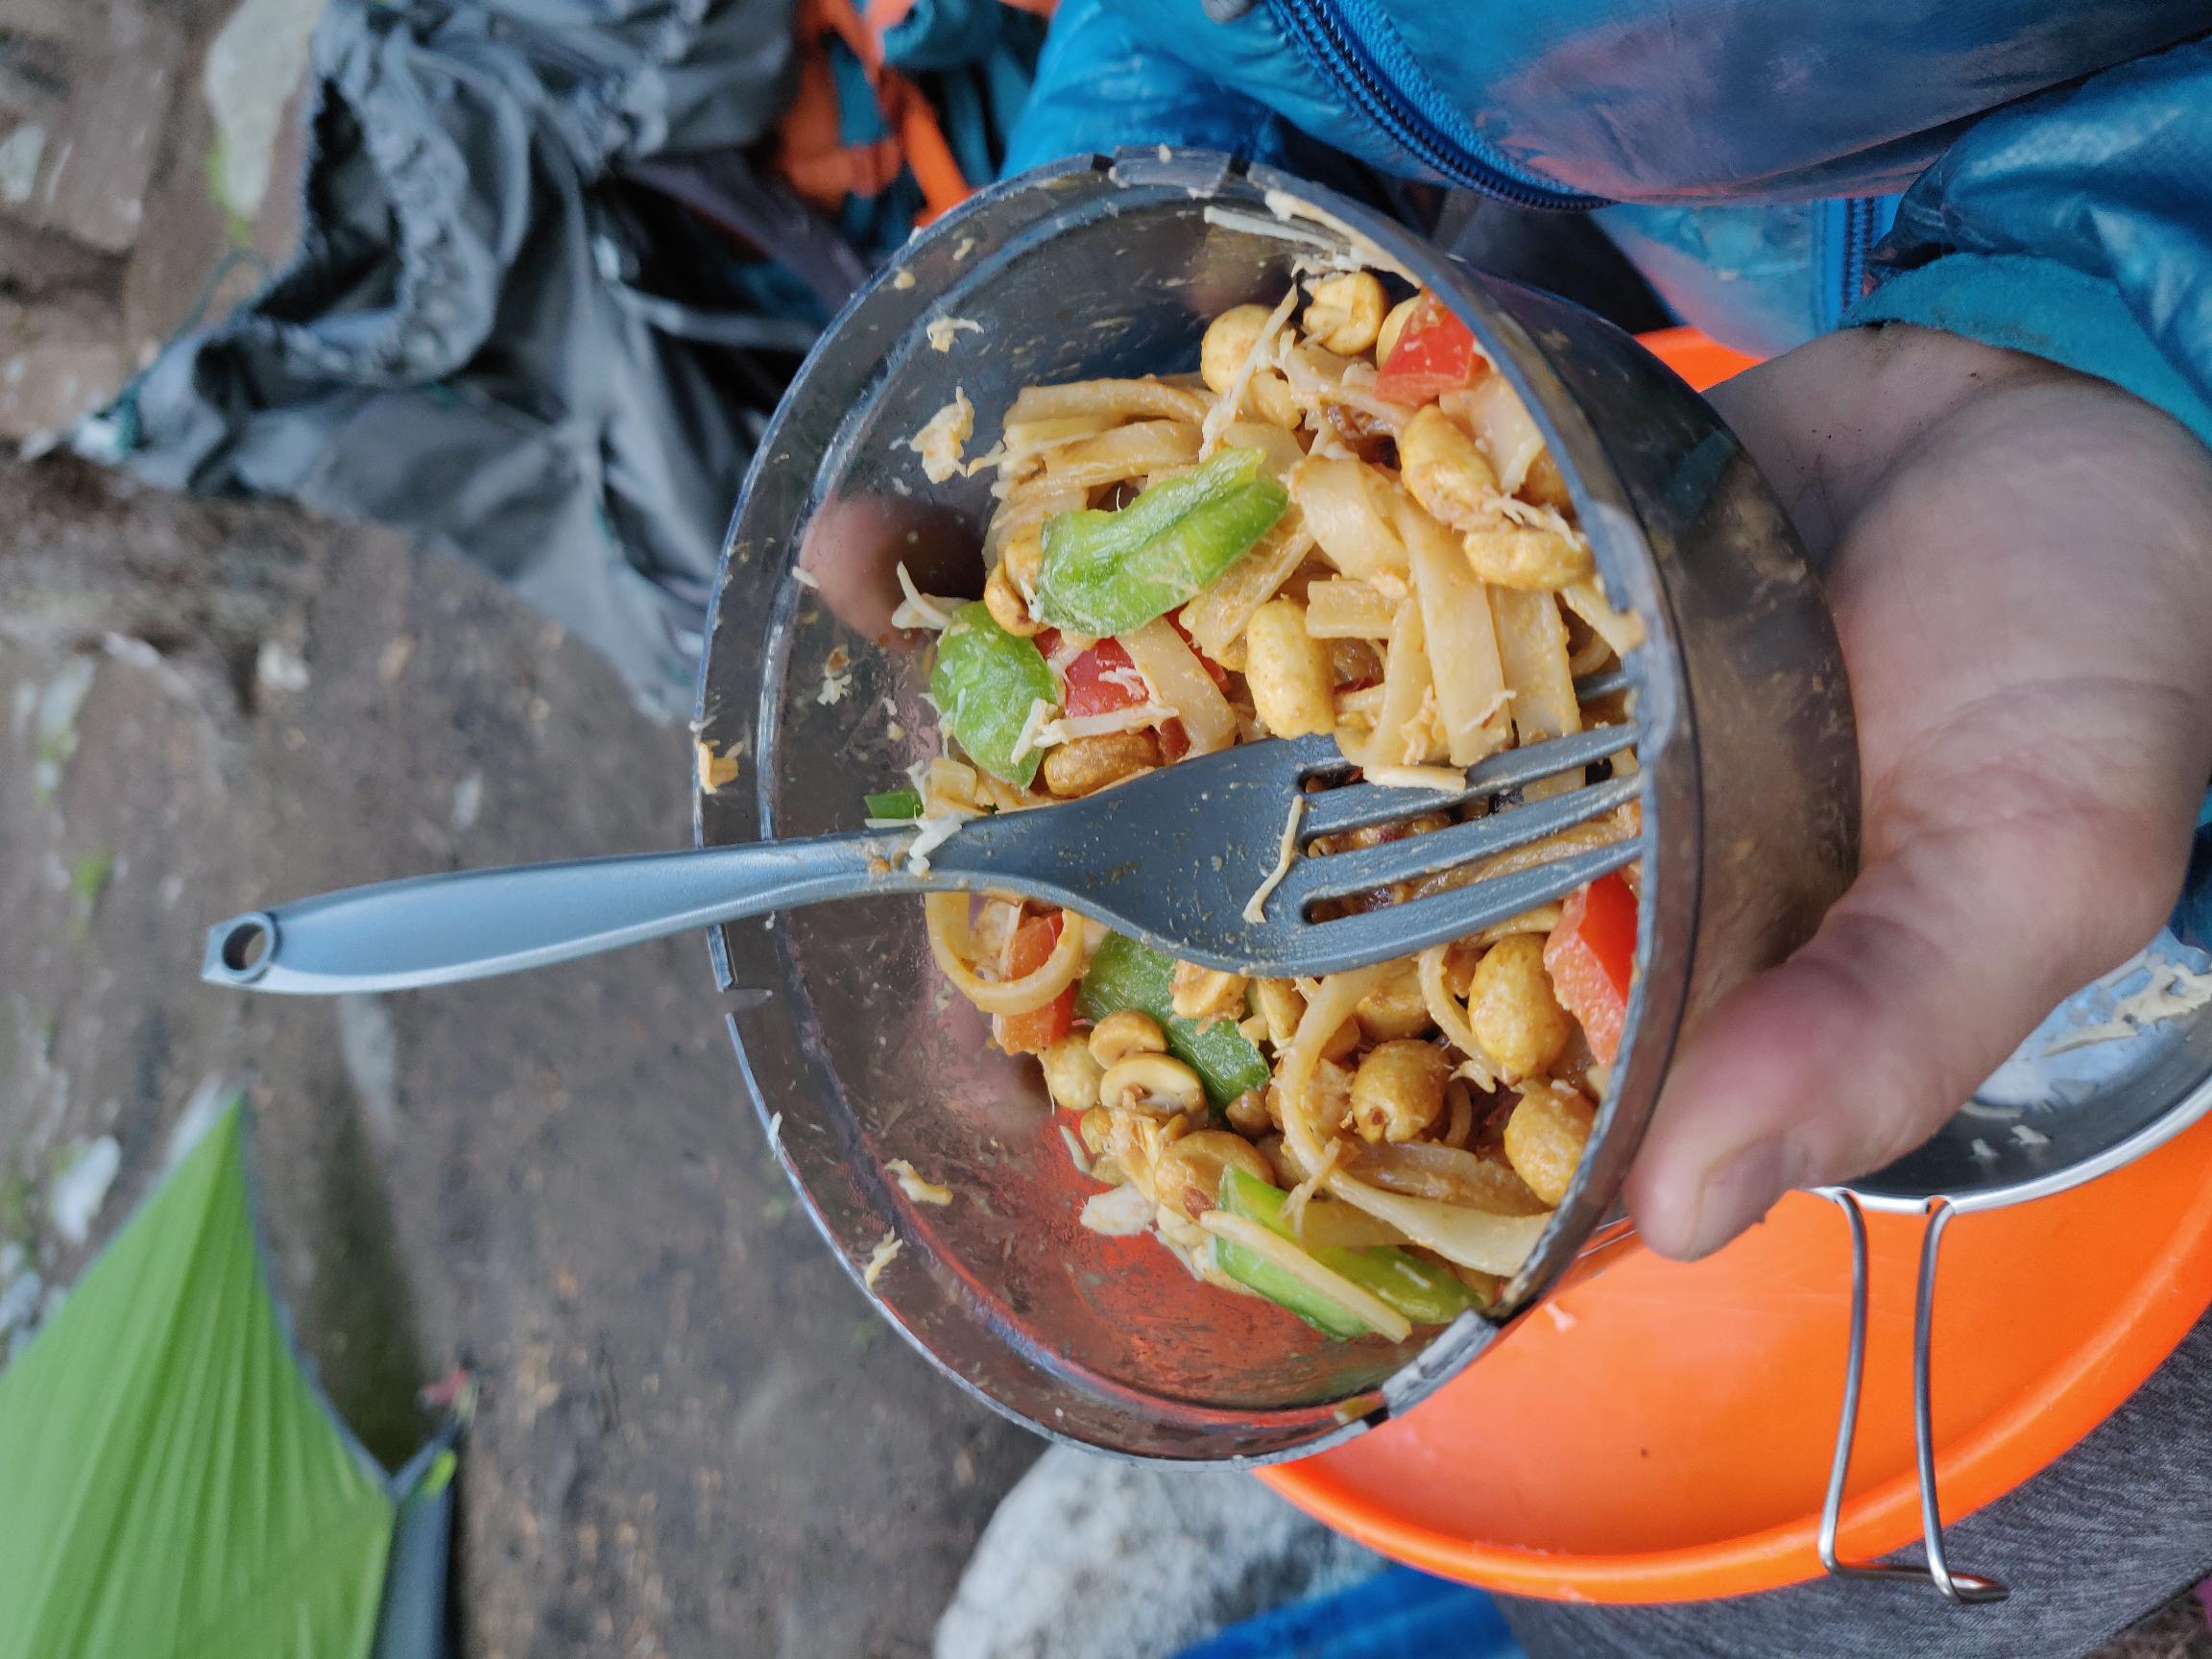 Backcountry pad thai for dinner before the big day